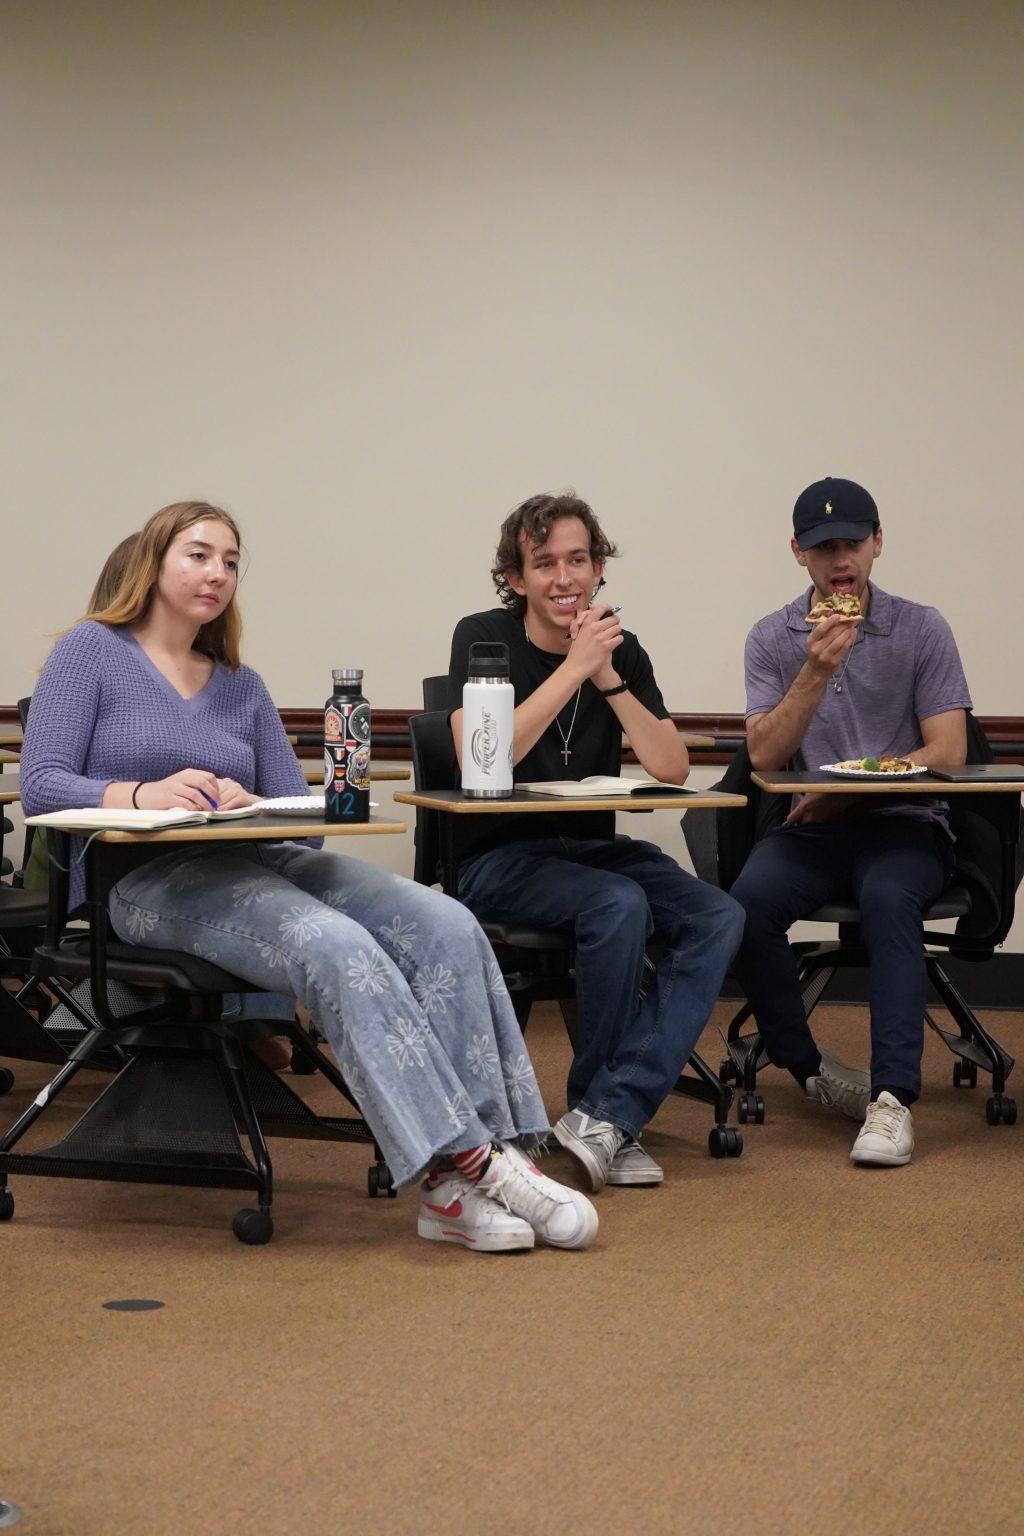 Micaela Shackleford, Colin Wiese and James LaRue (pictured left to right) organize Beyond the Bubble event. Beyond the Bubble is a newer interfaith initiative that held its first meeting Feb. 15, in the Black Family Plaza Classrooms.